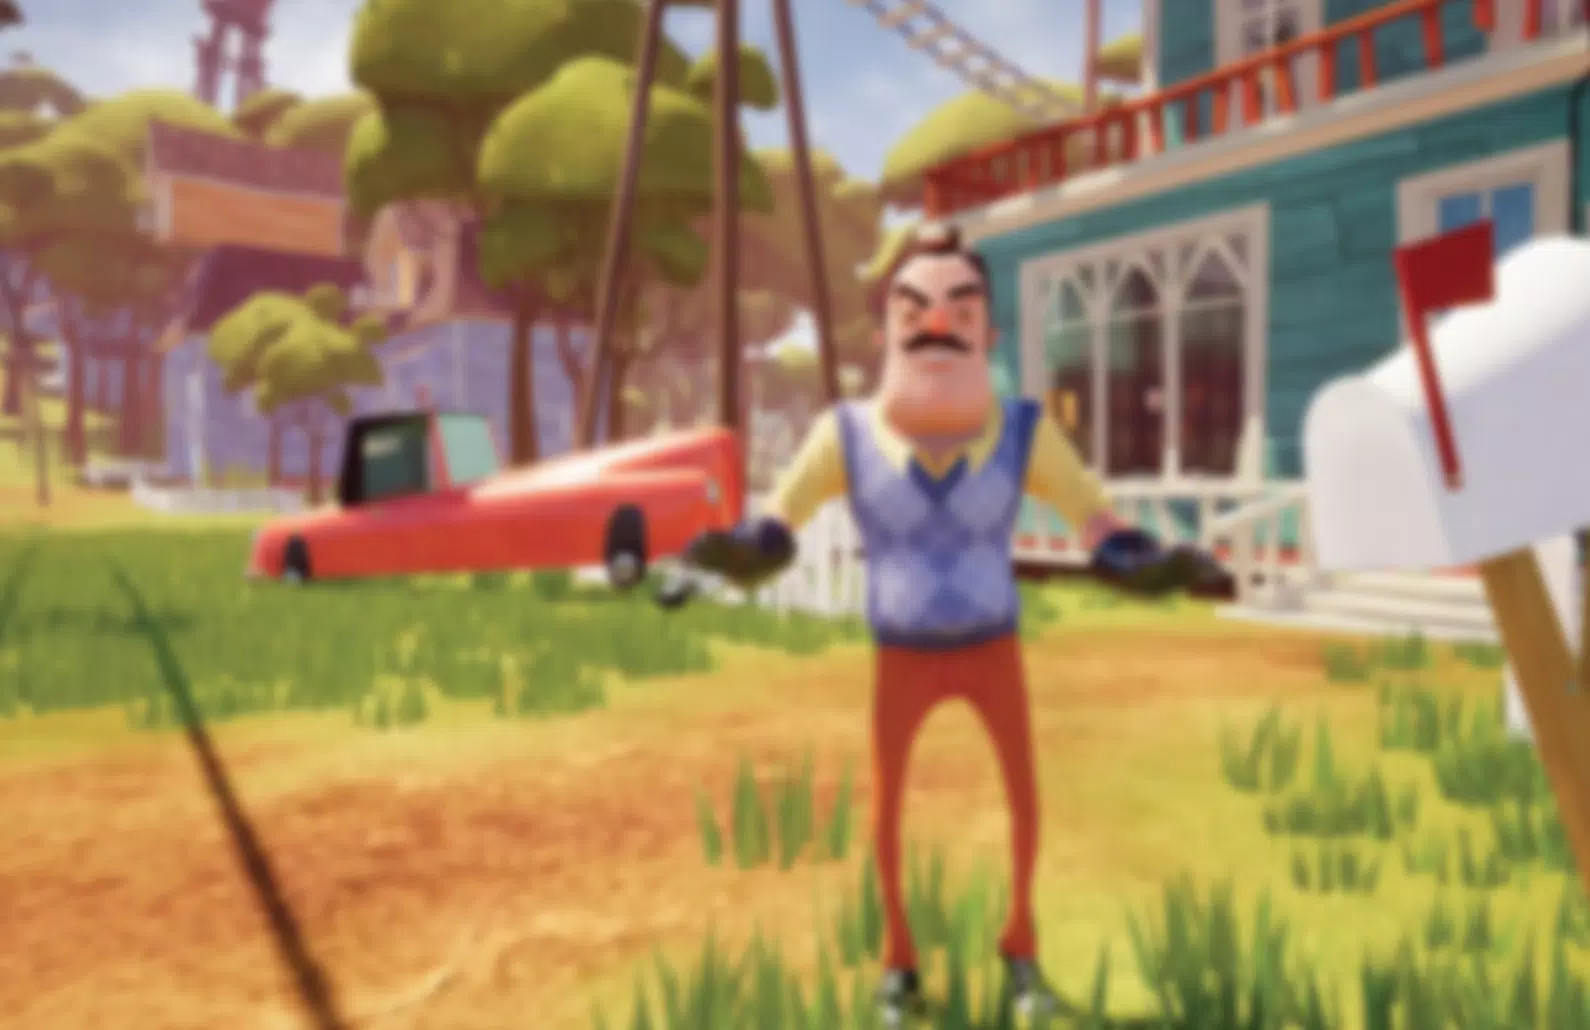 Secret Neighbor WP APK for Android - Download